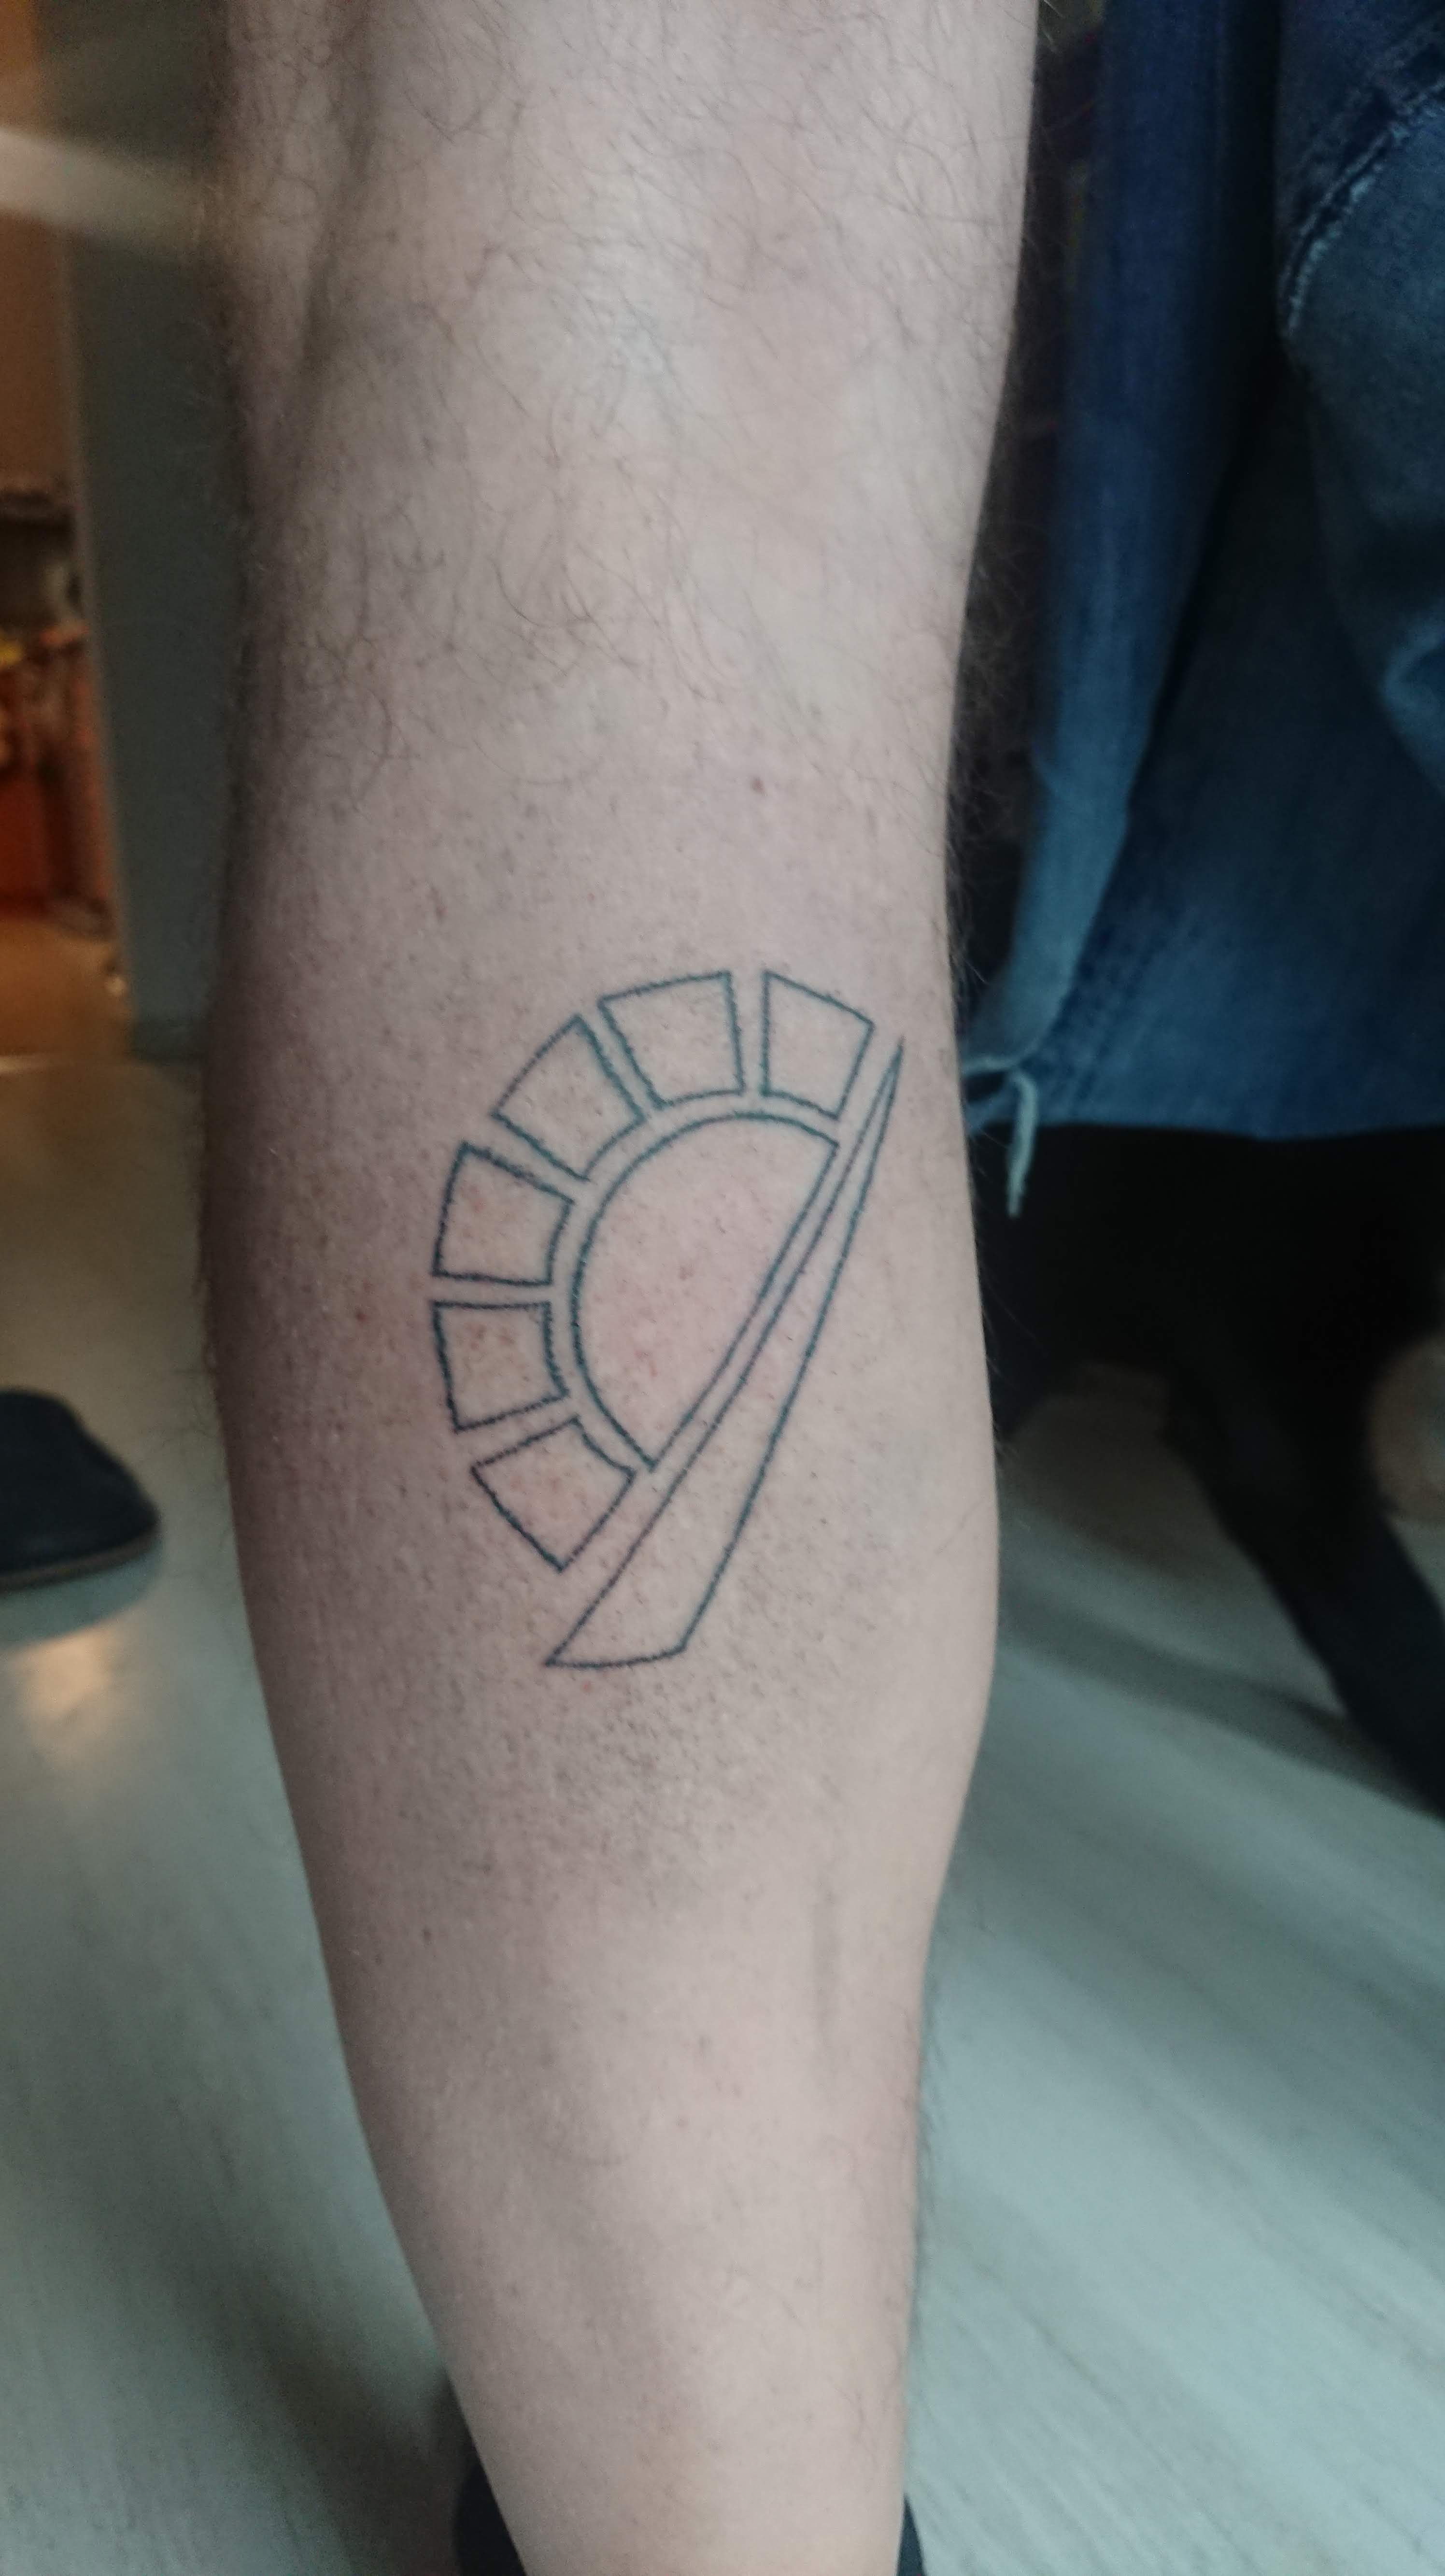 Tony Stark Arc Reactor designed by me Tattooed on by Jace at Pergatory in  Kansas City MO  rtattoos